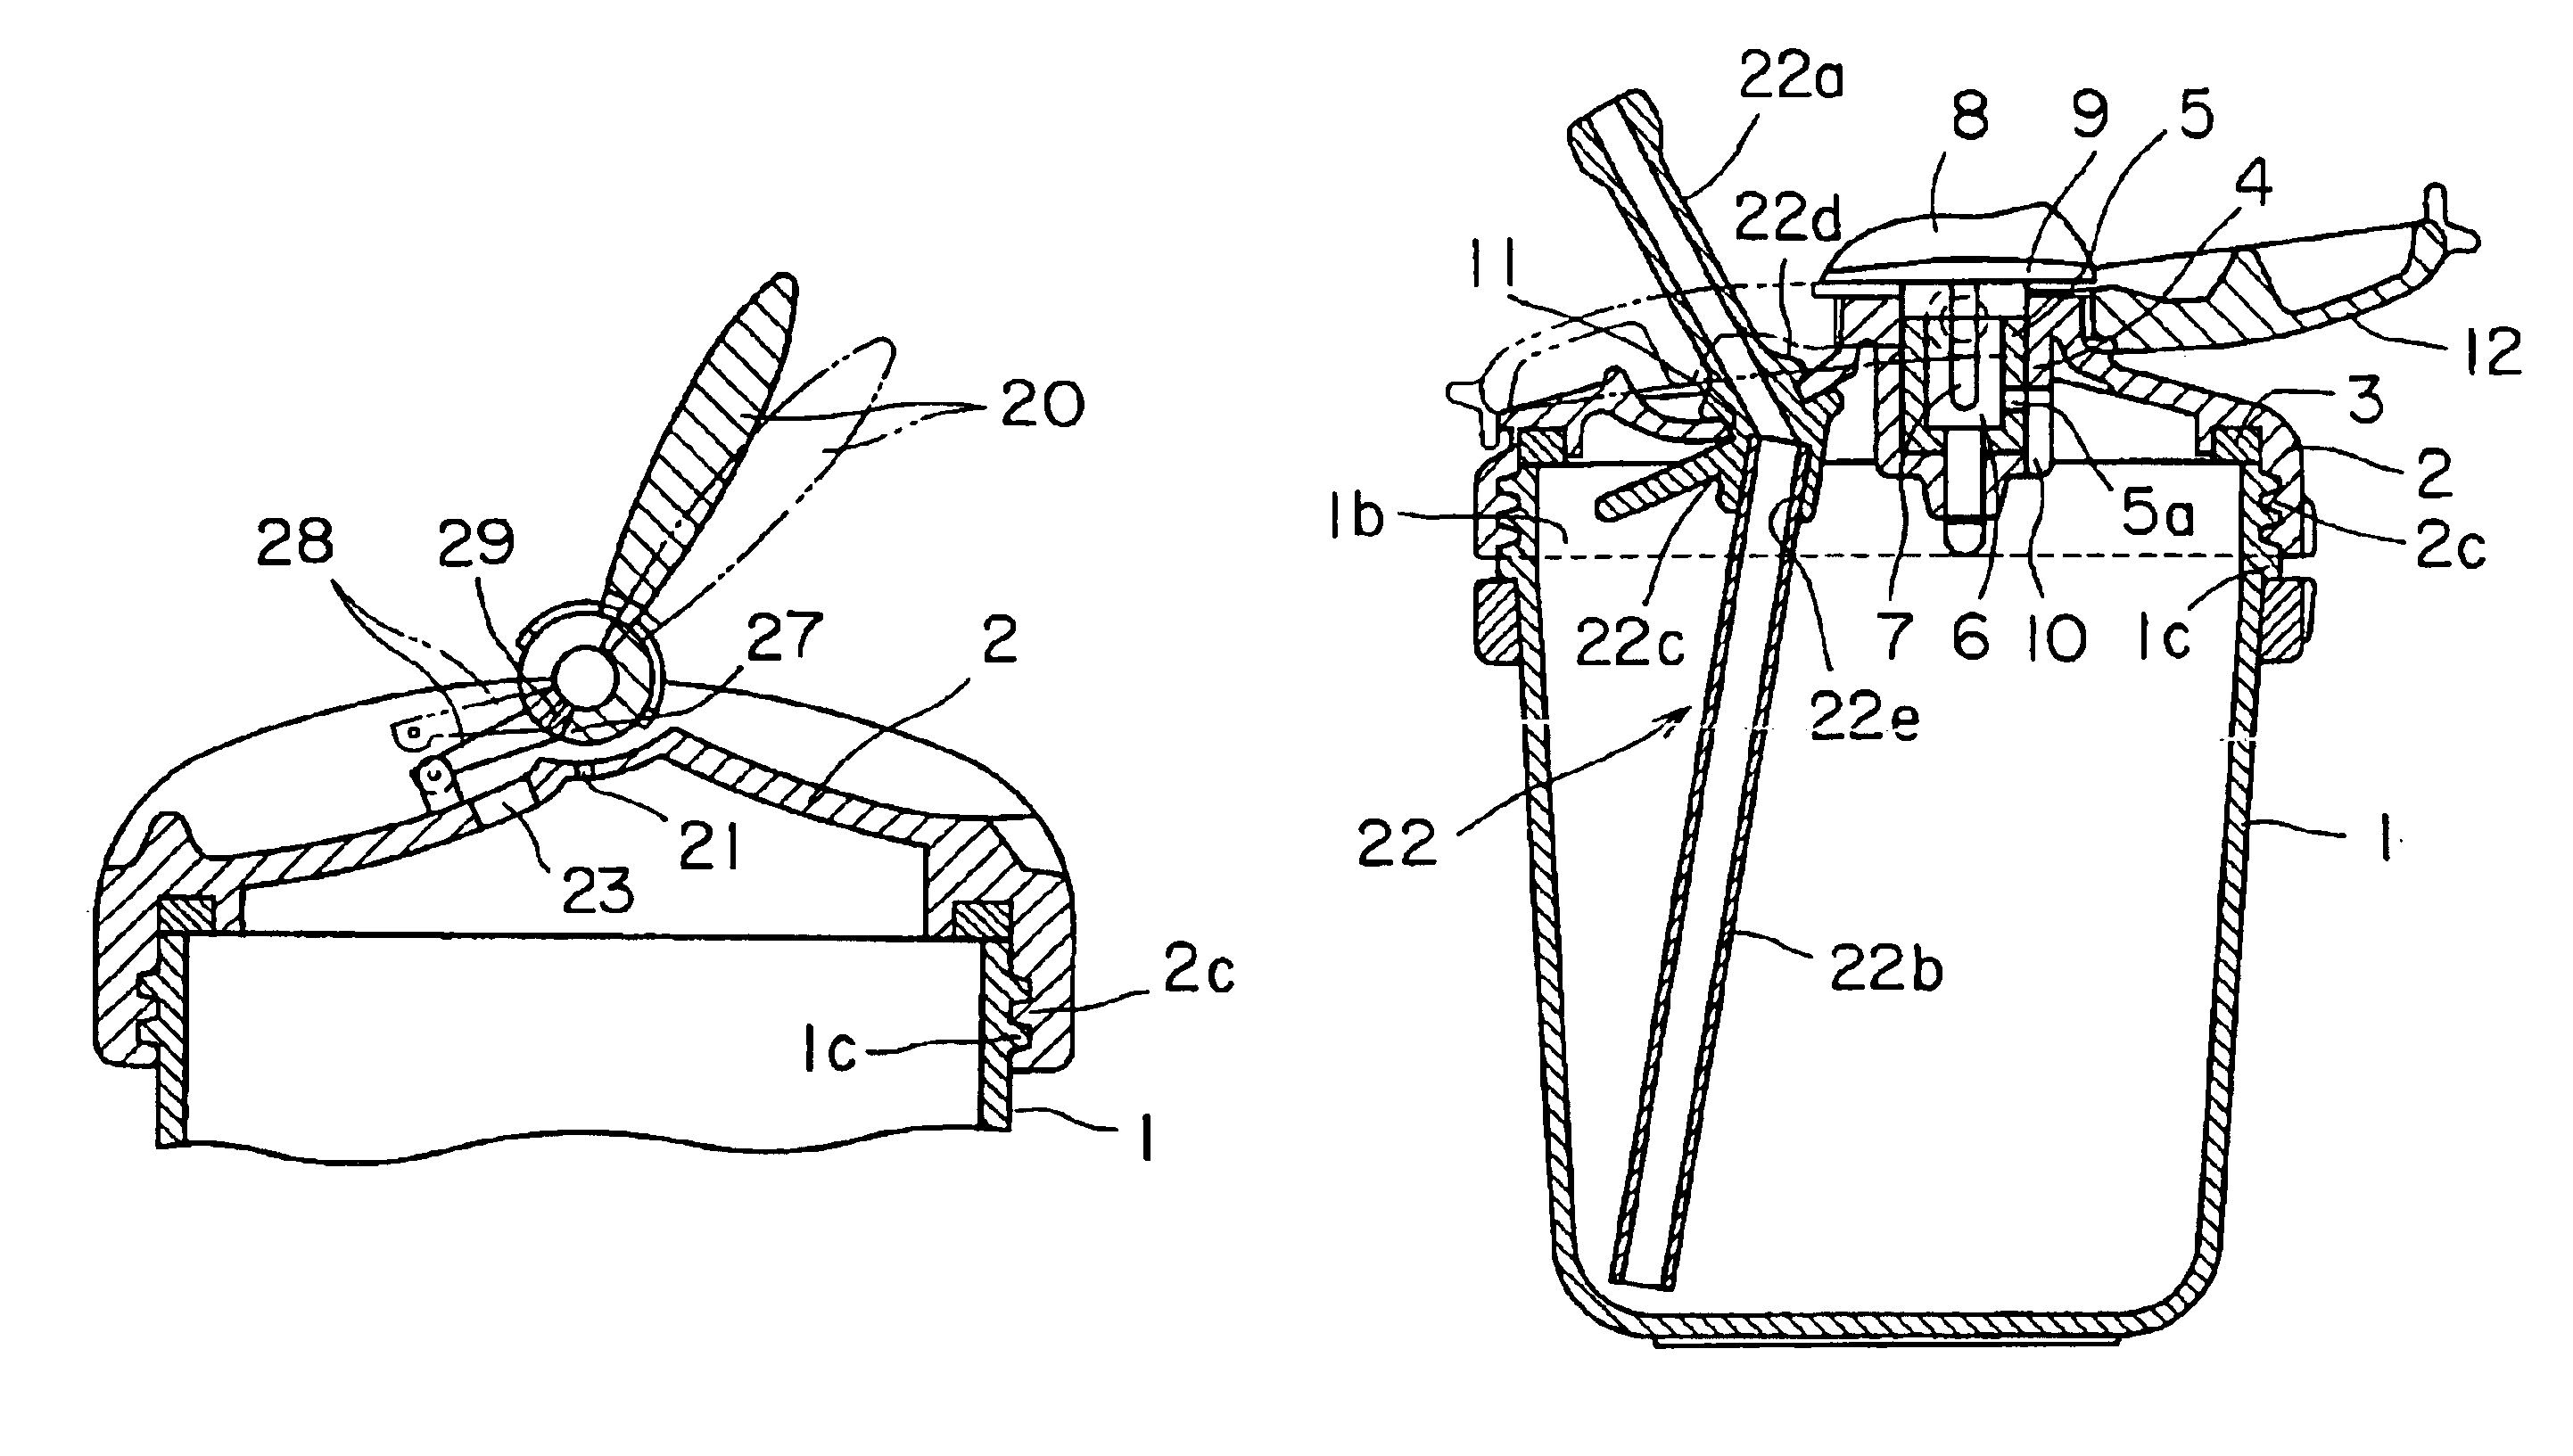 Beverage container with straw